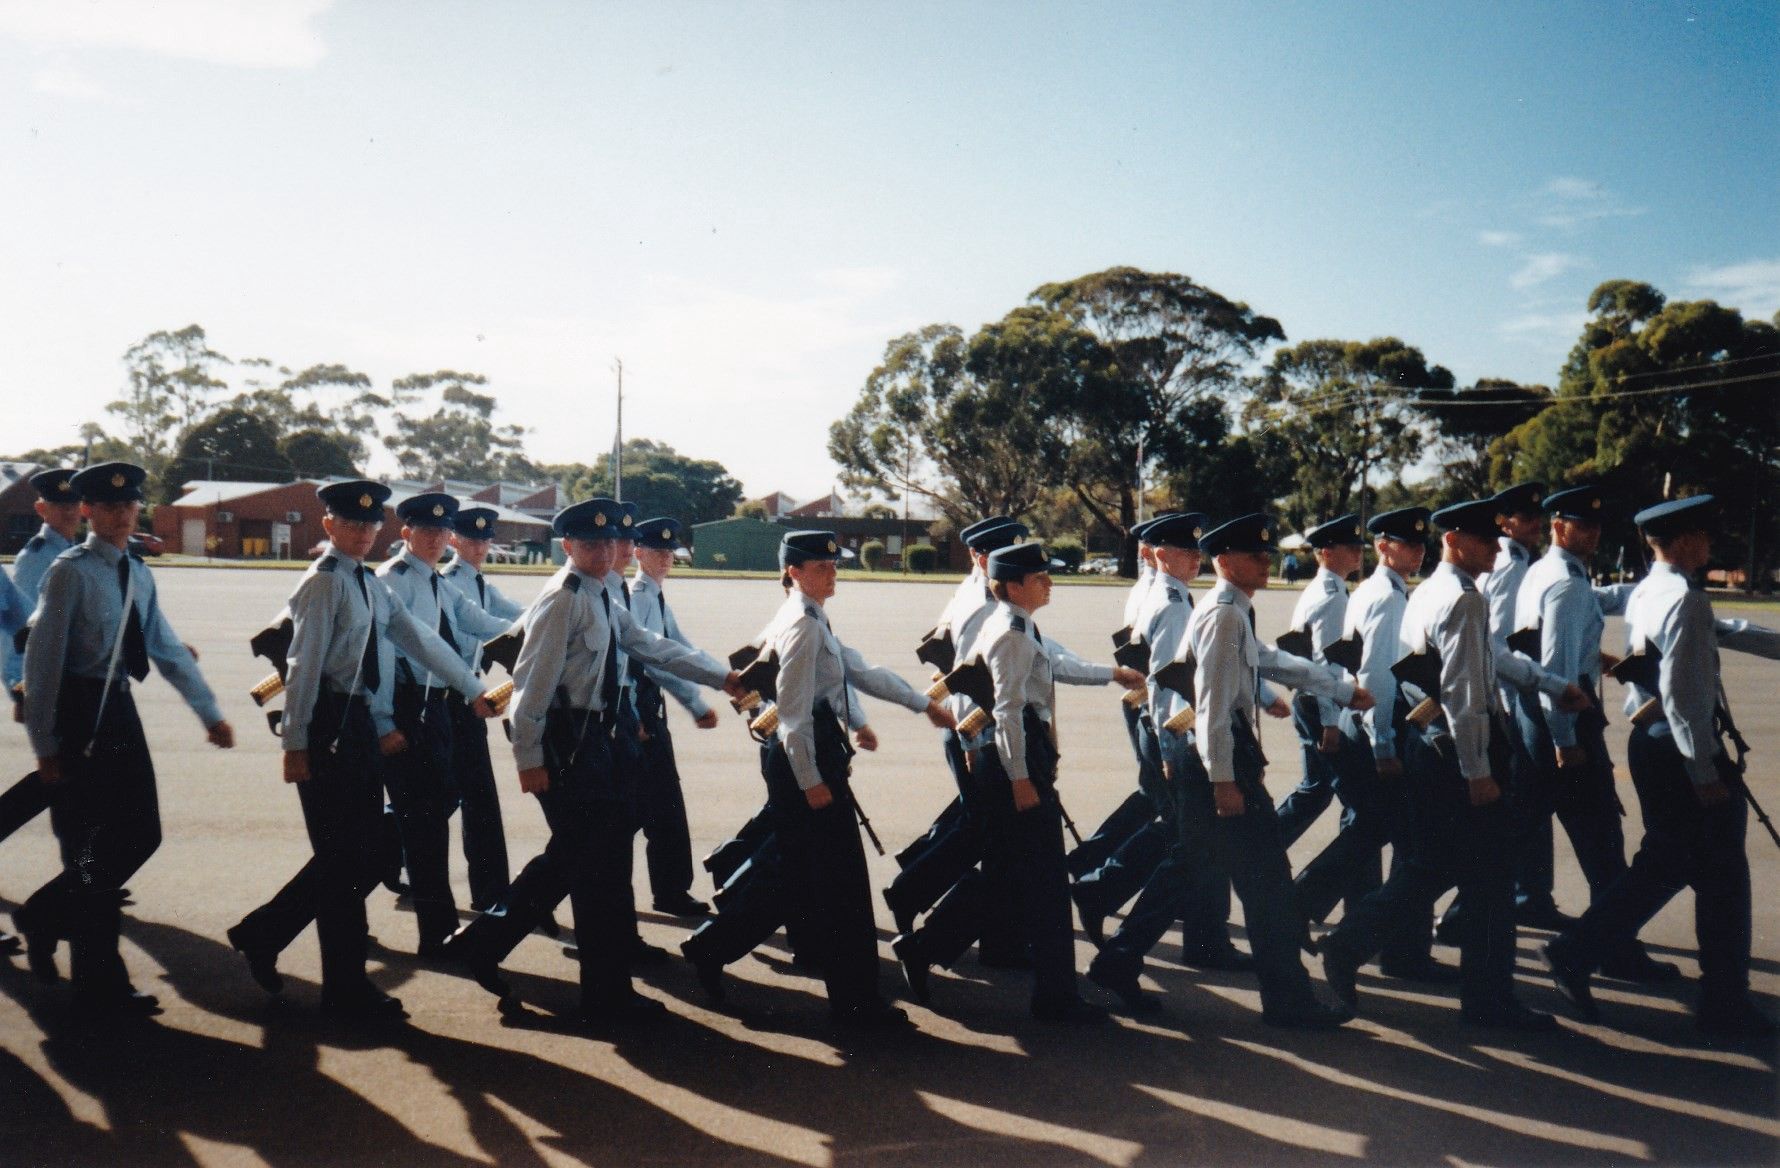 Author’s photo, Graduation Parade from Air Force basic training.